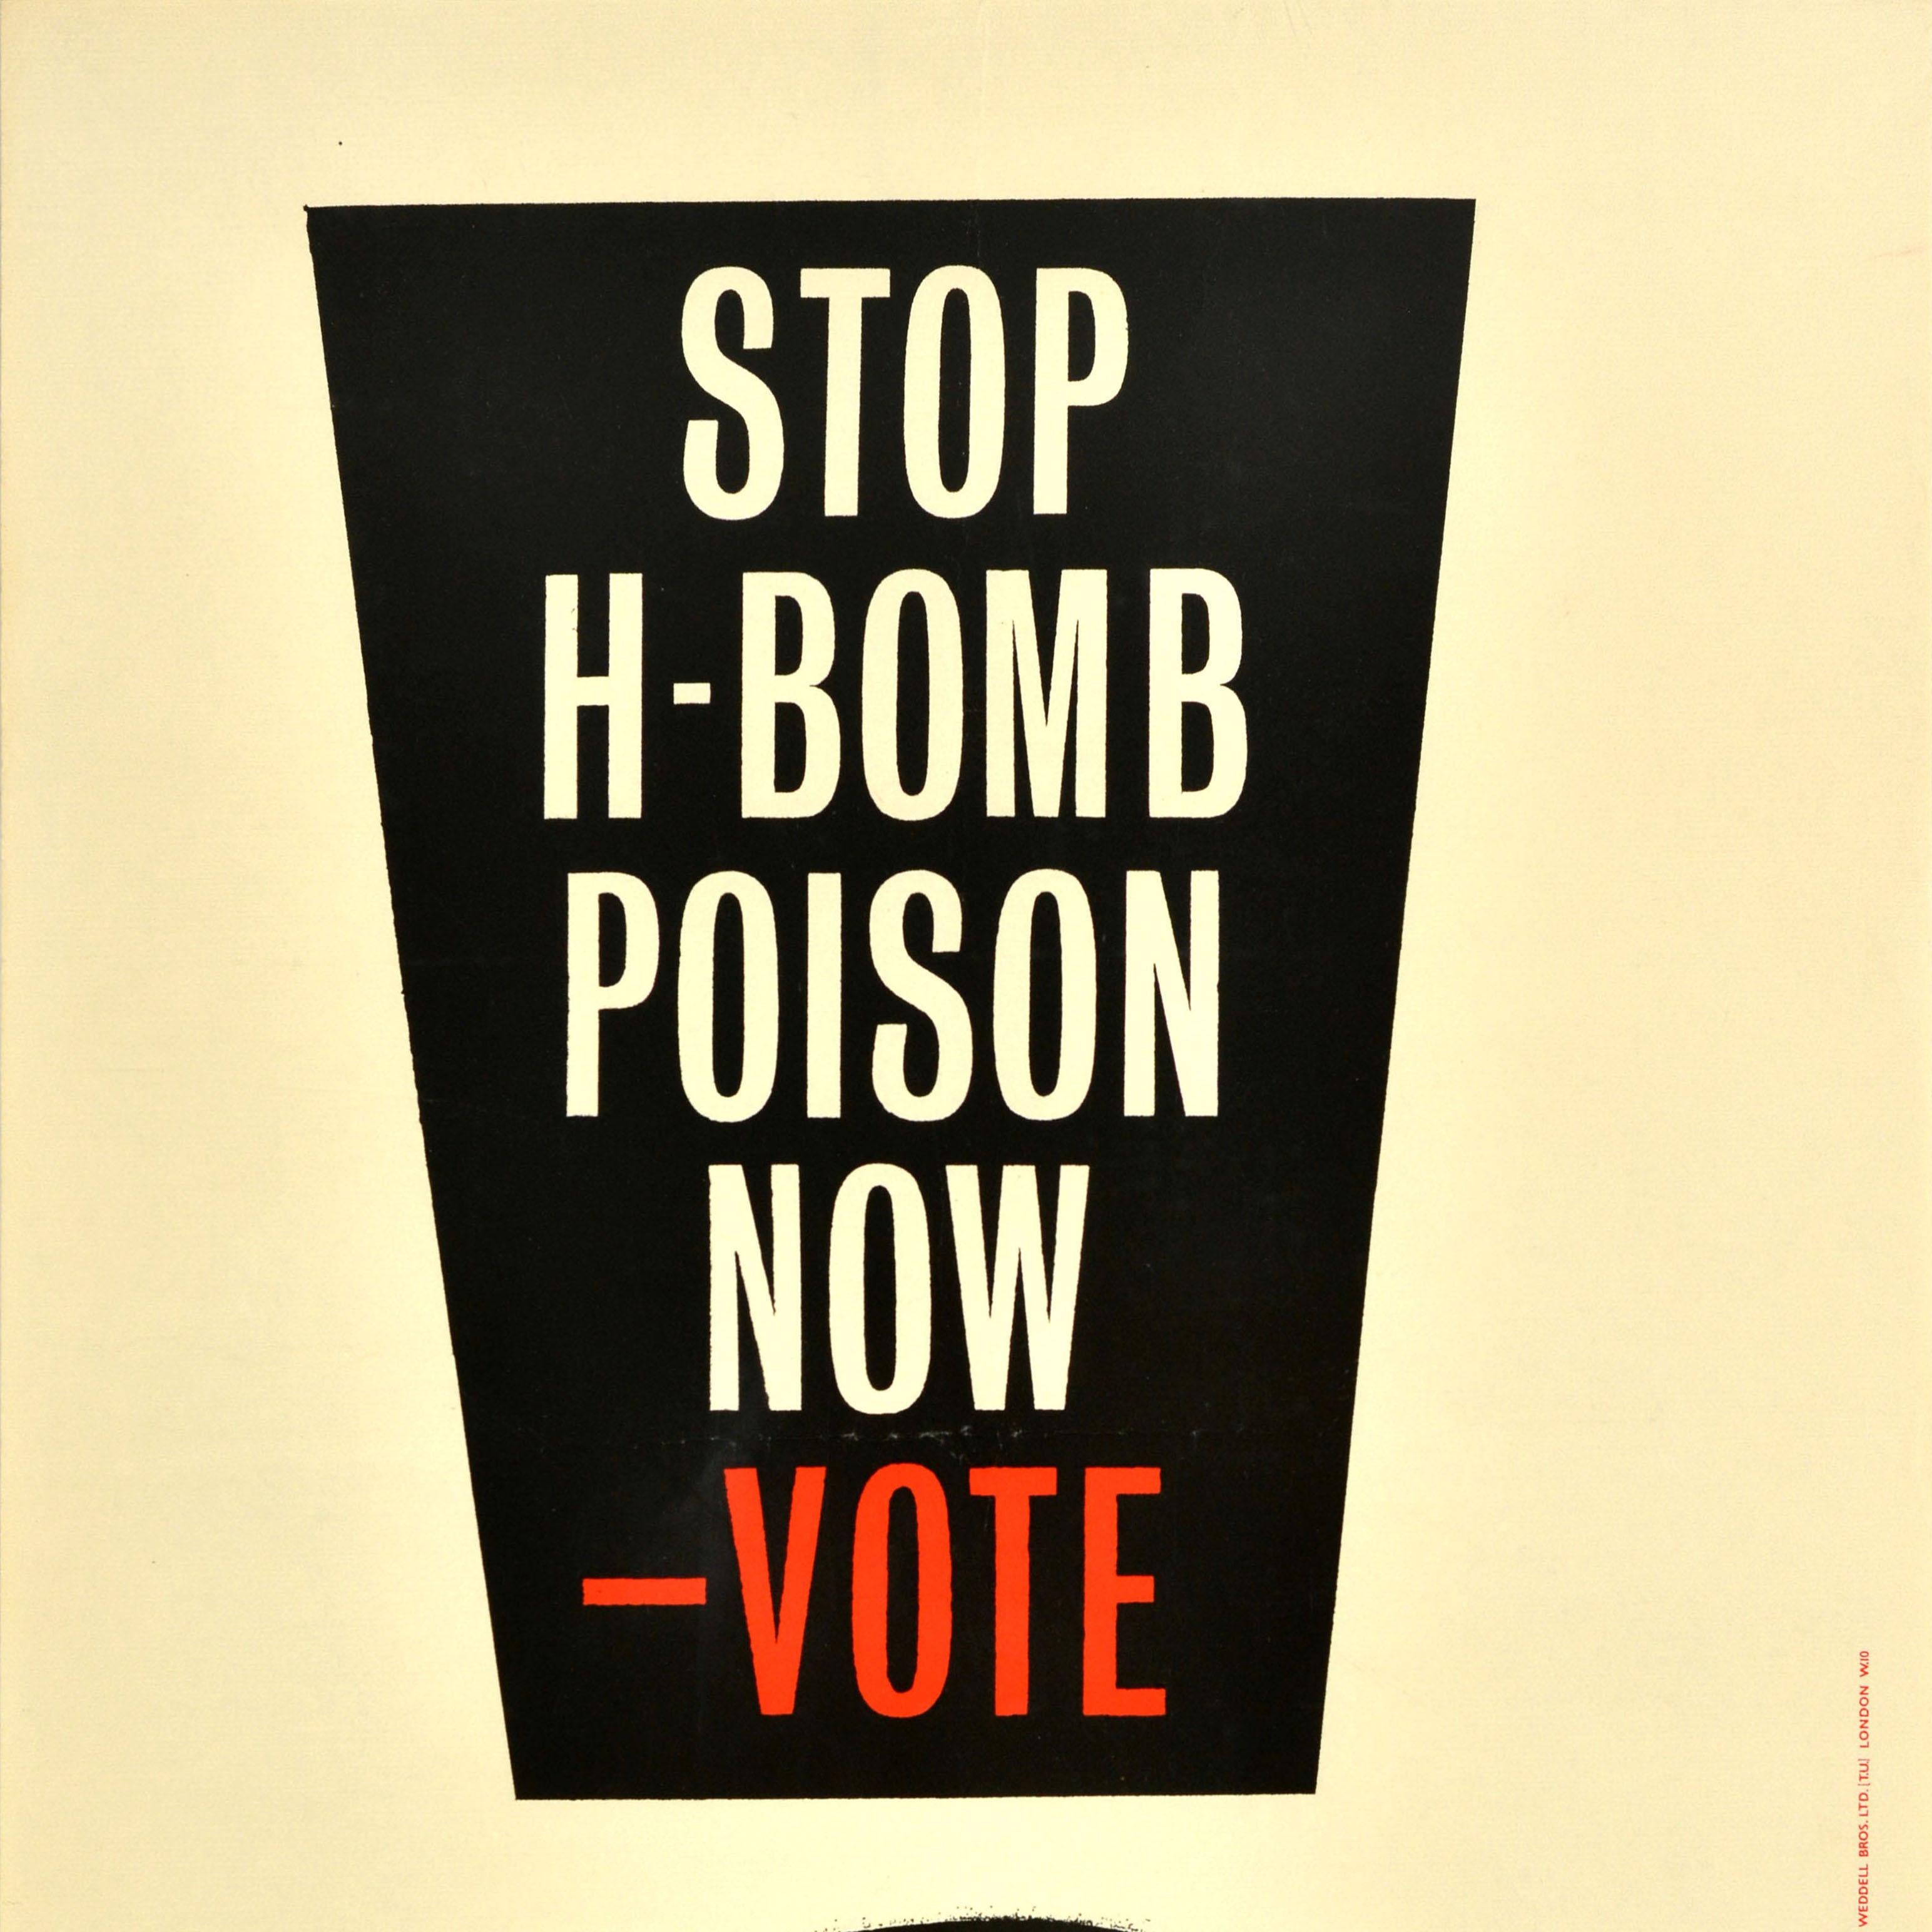 Original vintage political General Election poster issued by the Labour Party against the hydrogen bomb featuring a dynamic design with the bold white and red letters inside a black exclamation mark - Stop H-Bomb Poison Now Vote Labour. Printed by